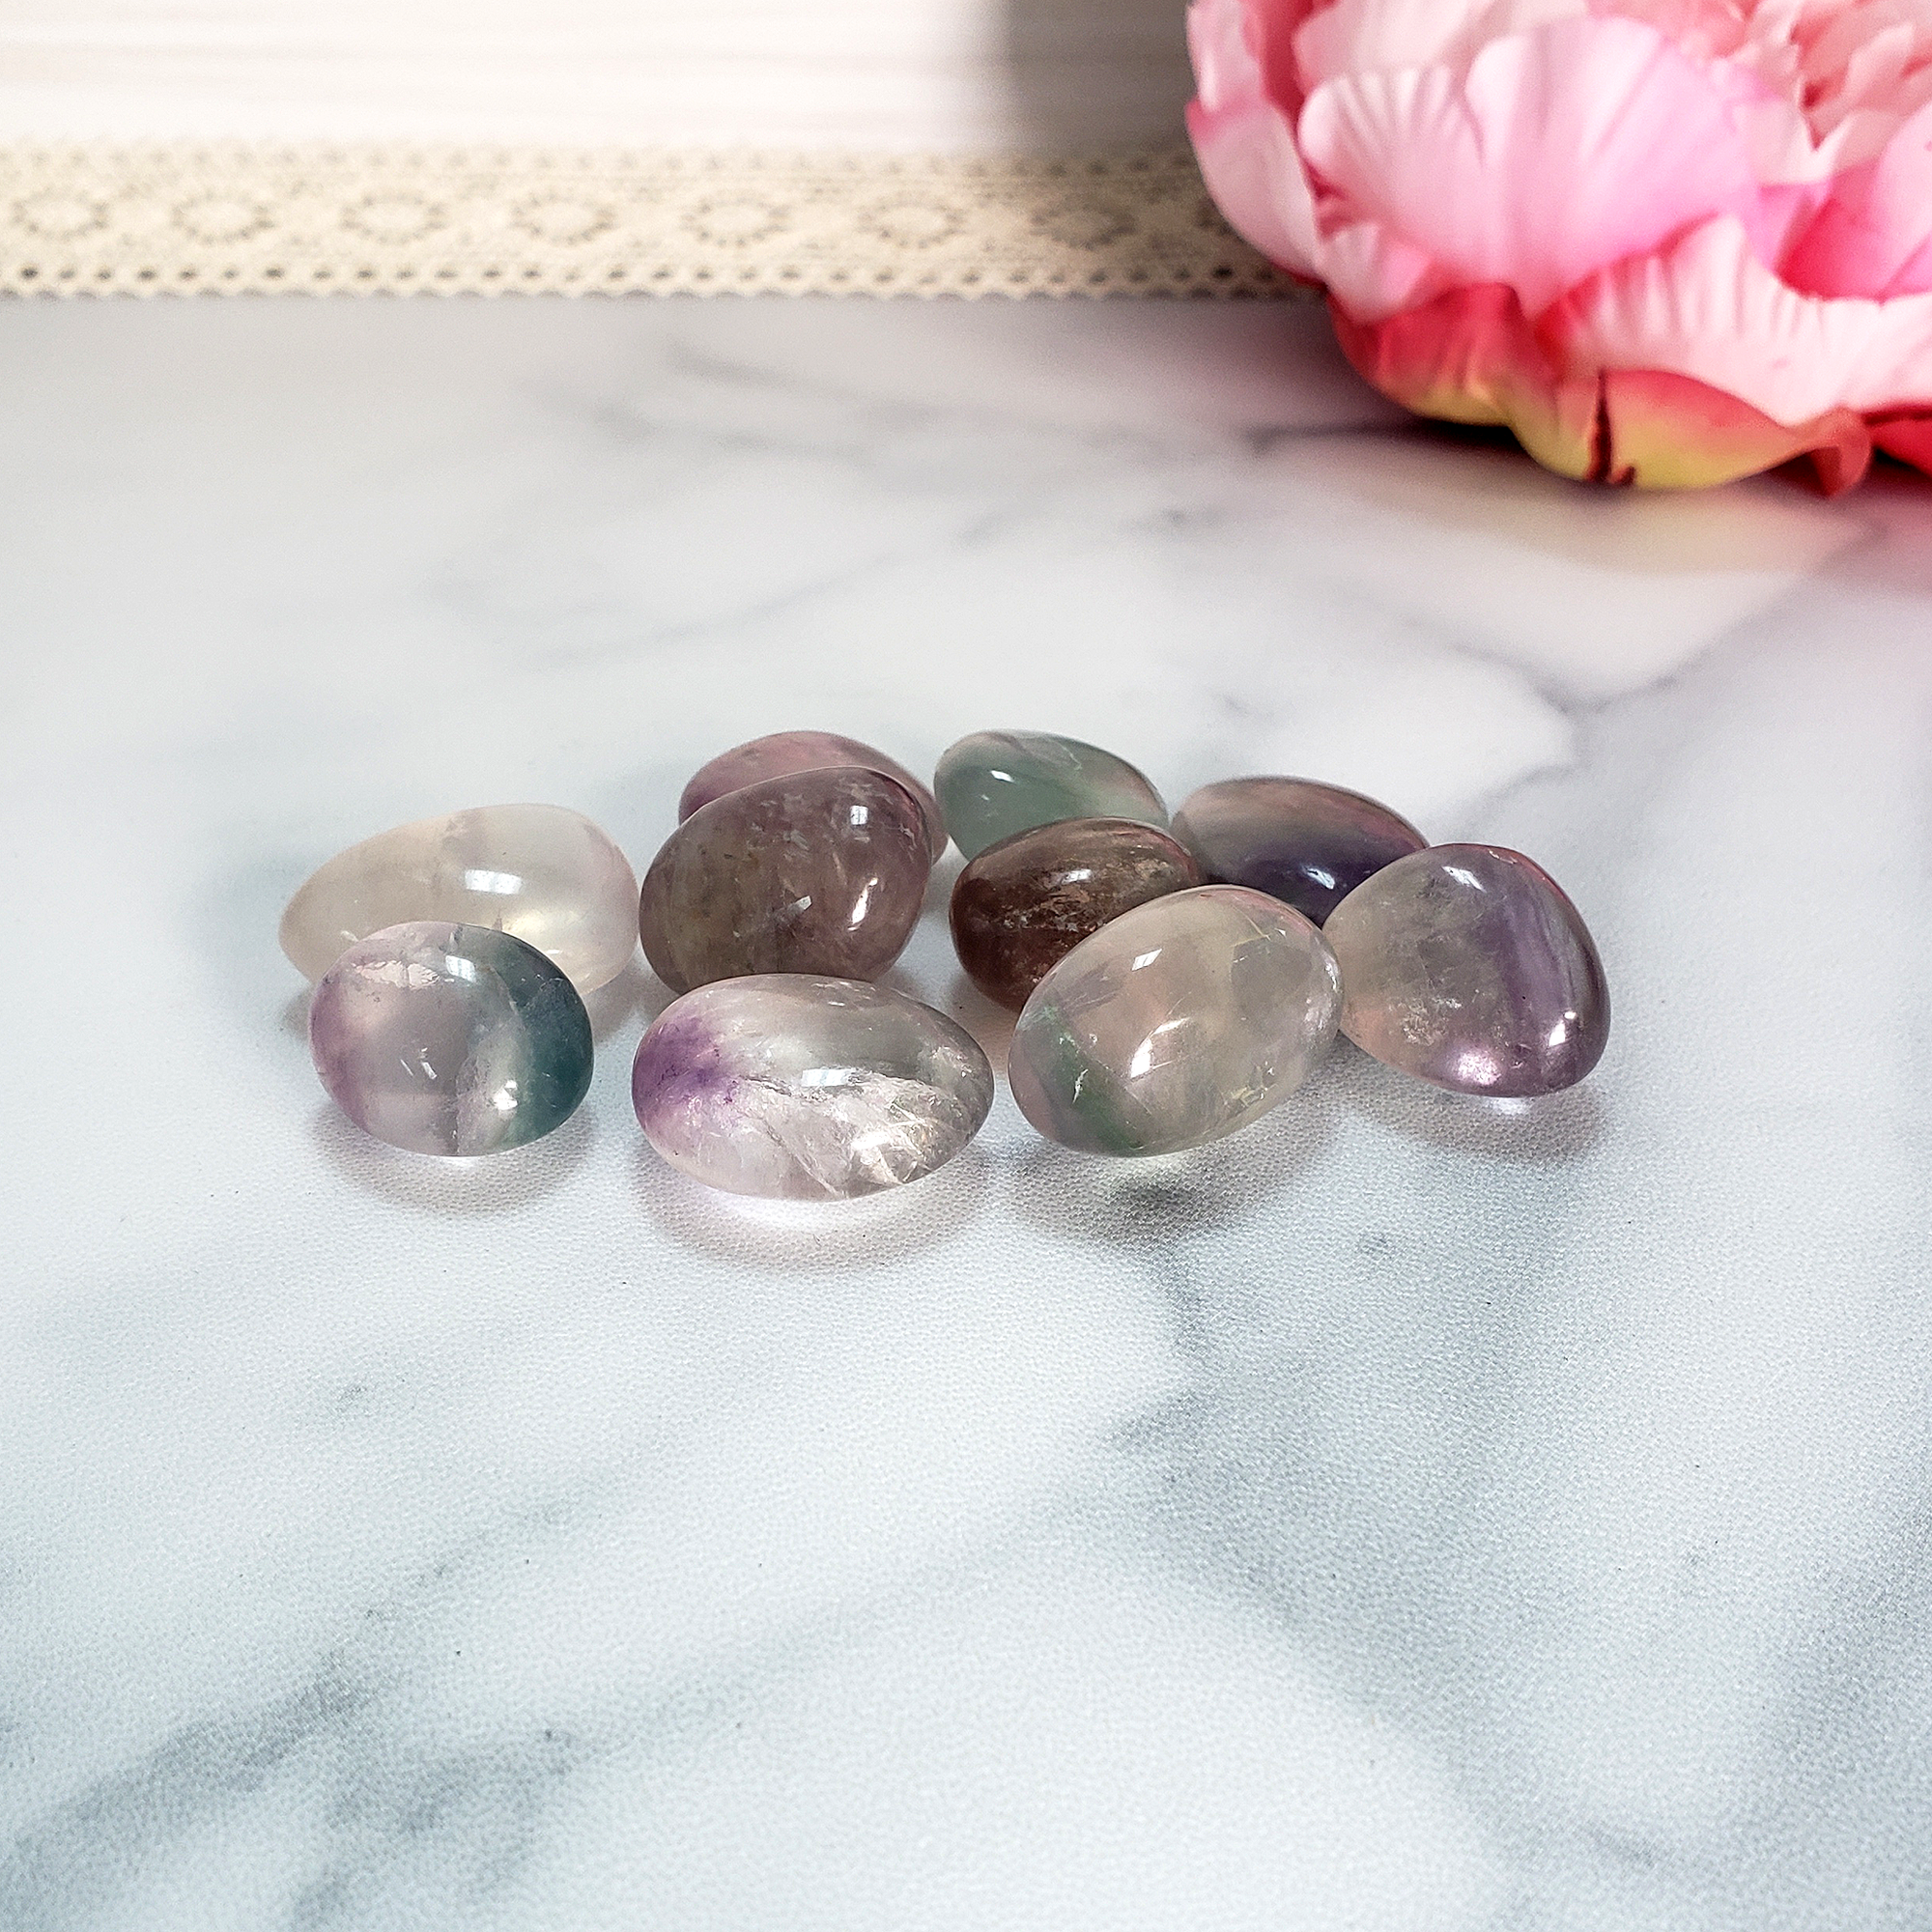 Ghost Pale Fluorite Crystal Natural Gemstone Tumbled Stone